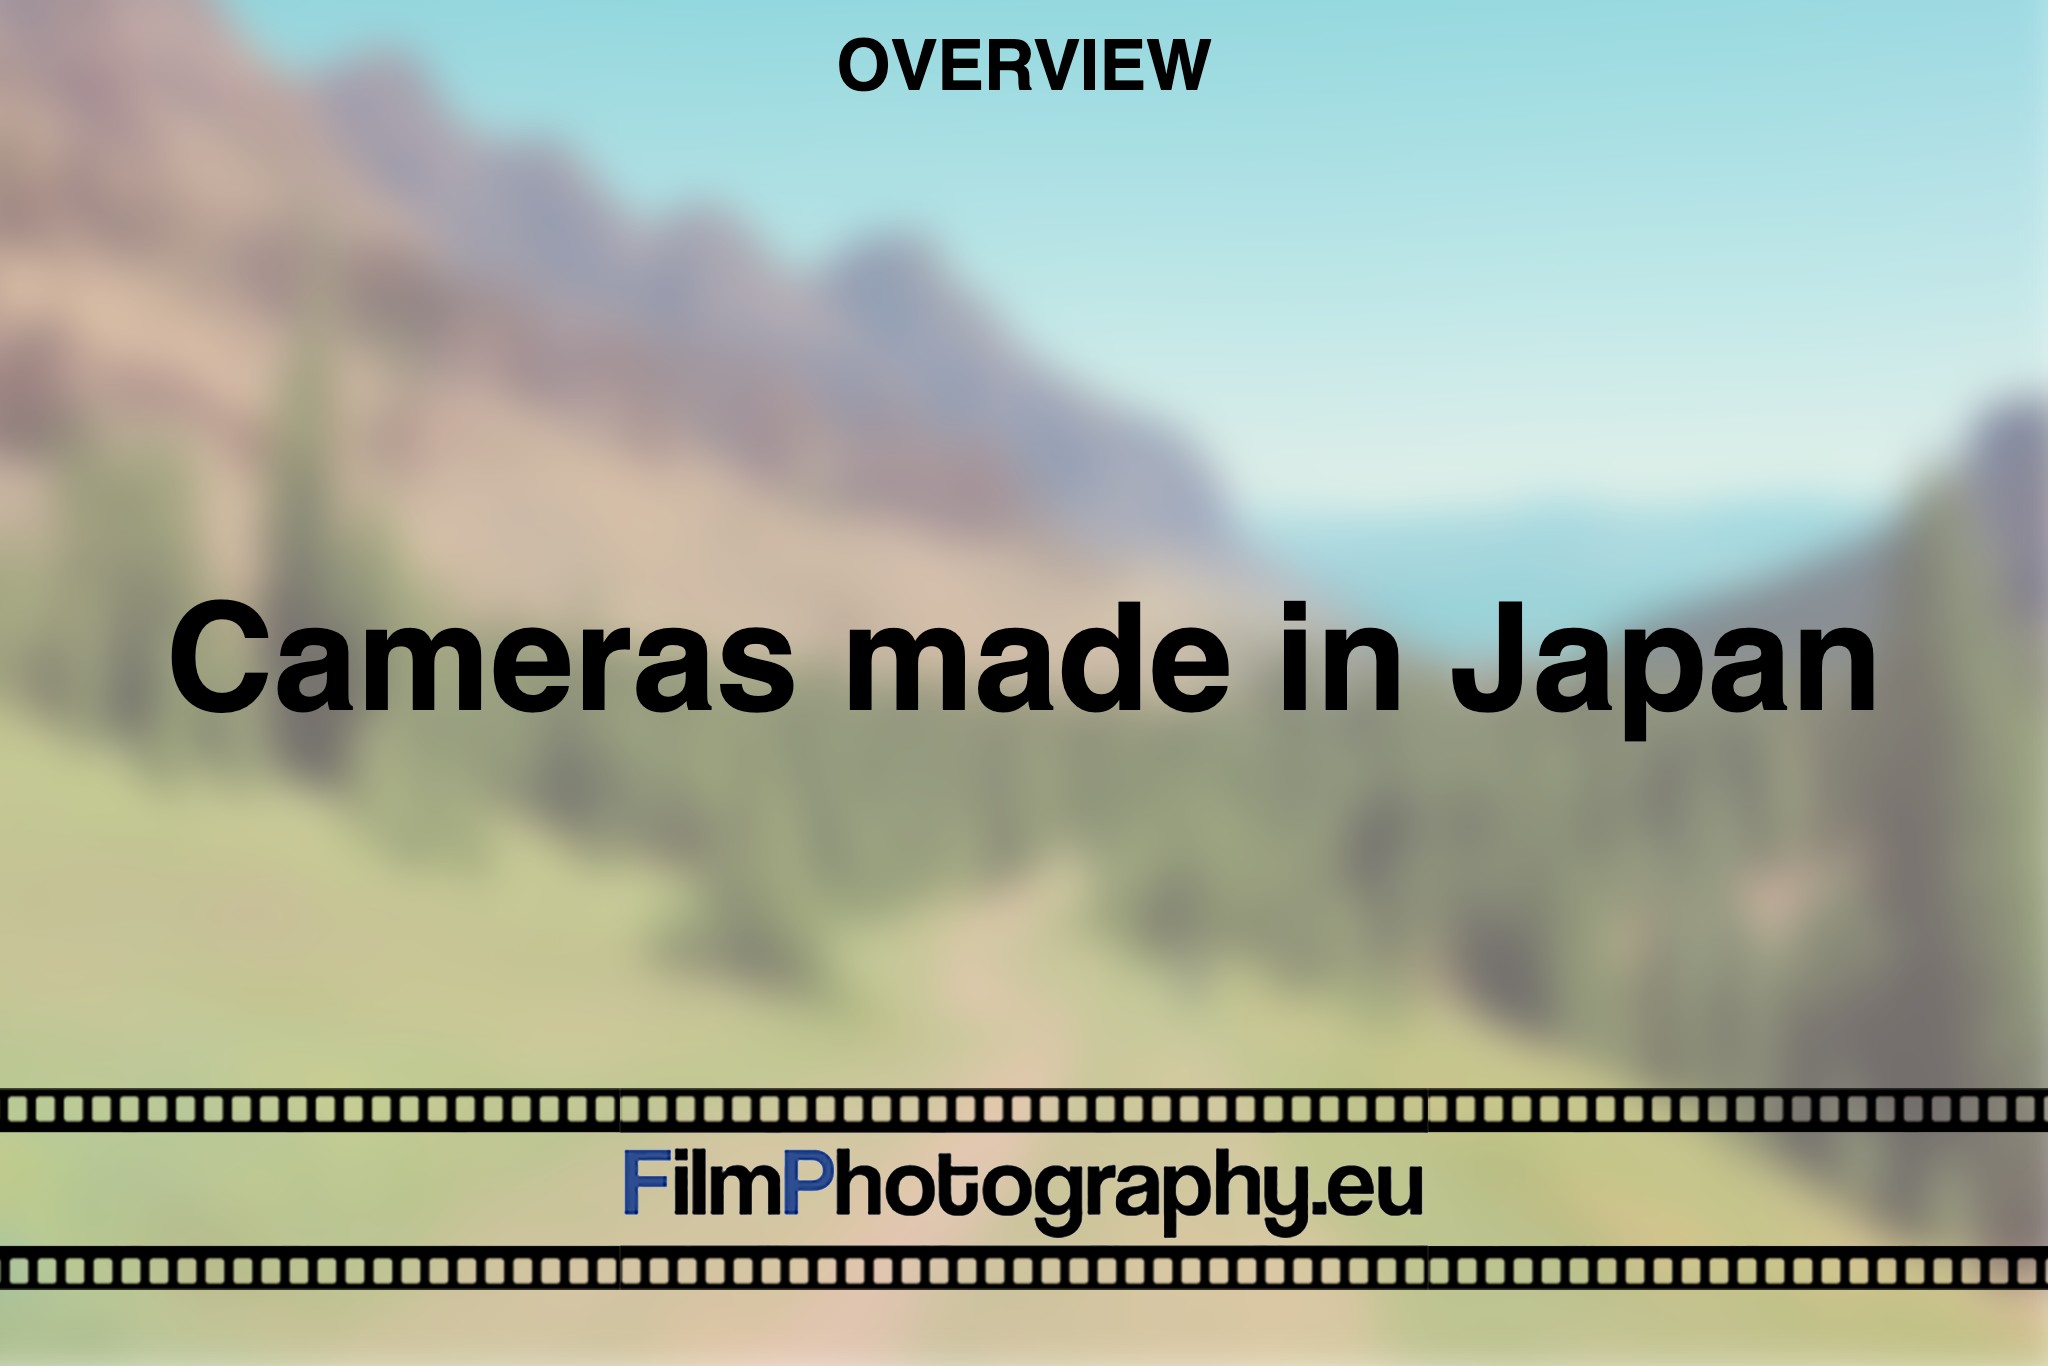 cameras-made-in-japan-production-factory-photo-bnv